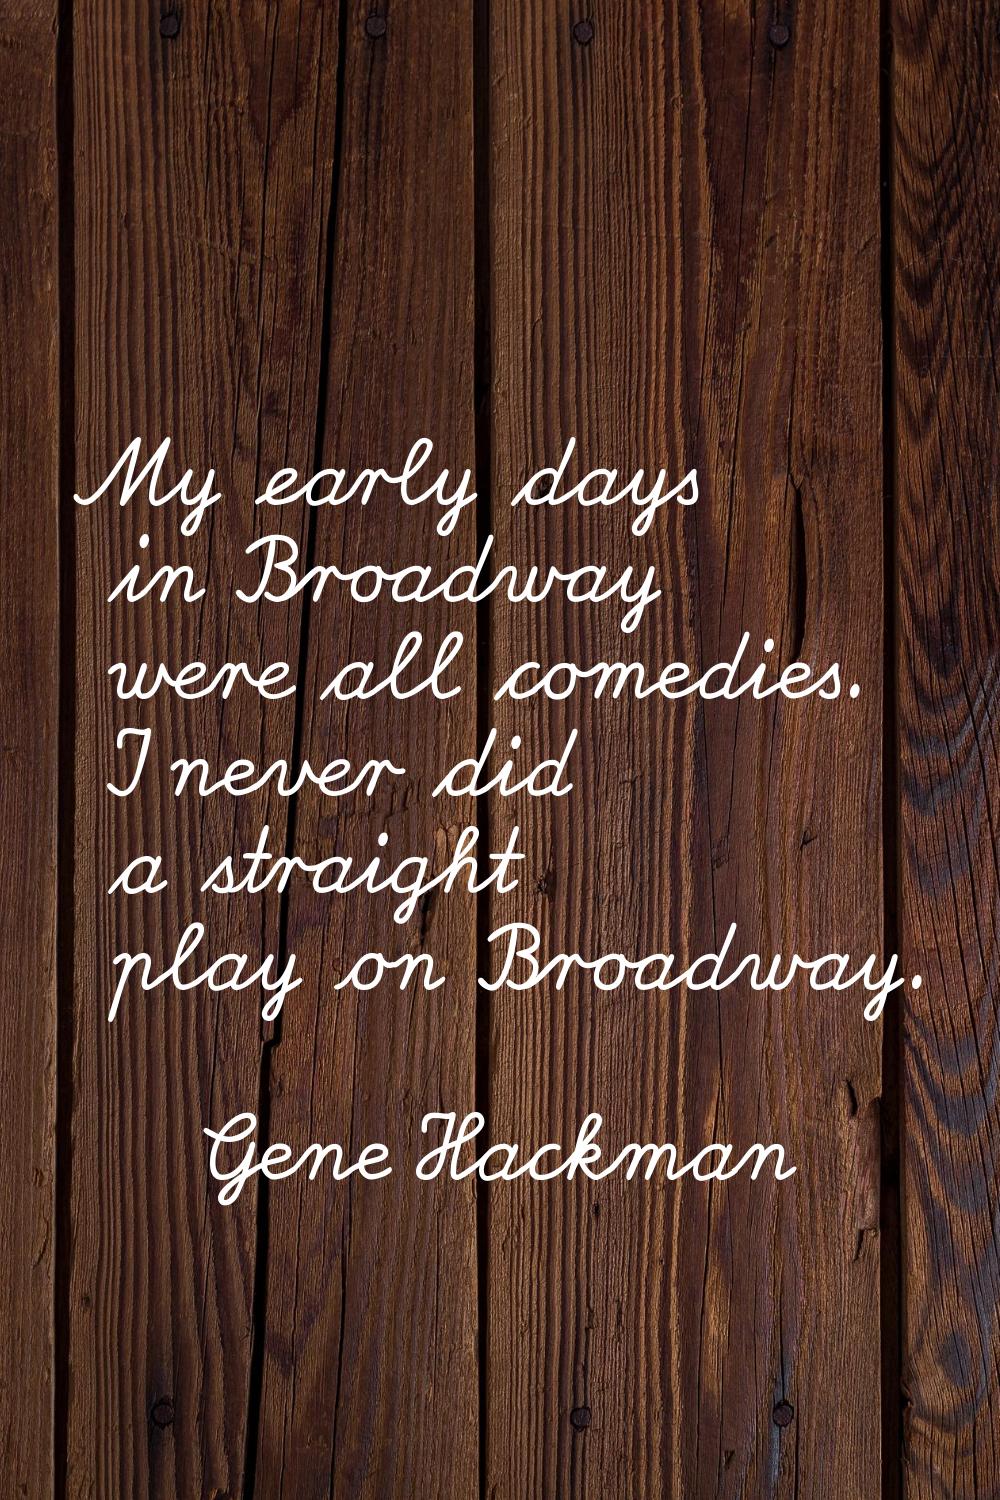 My early days in Broadway were all comedies. I never did a straight play on Broadway.